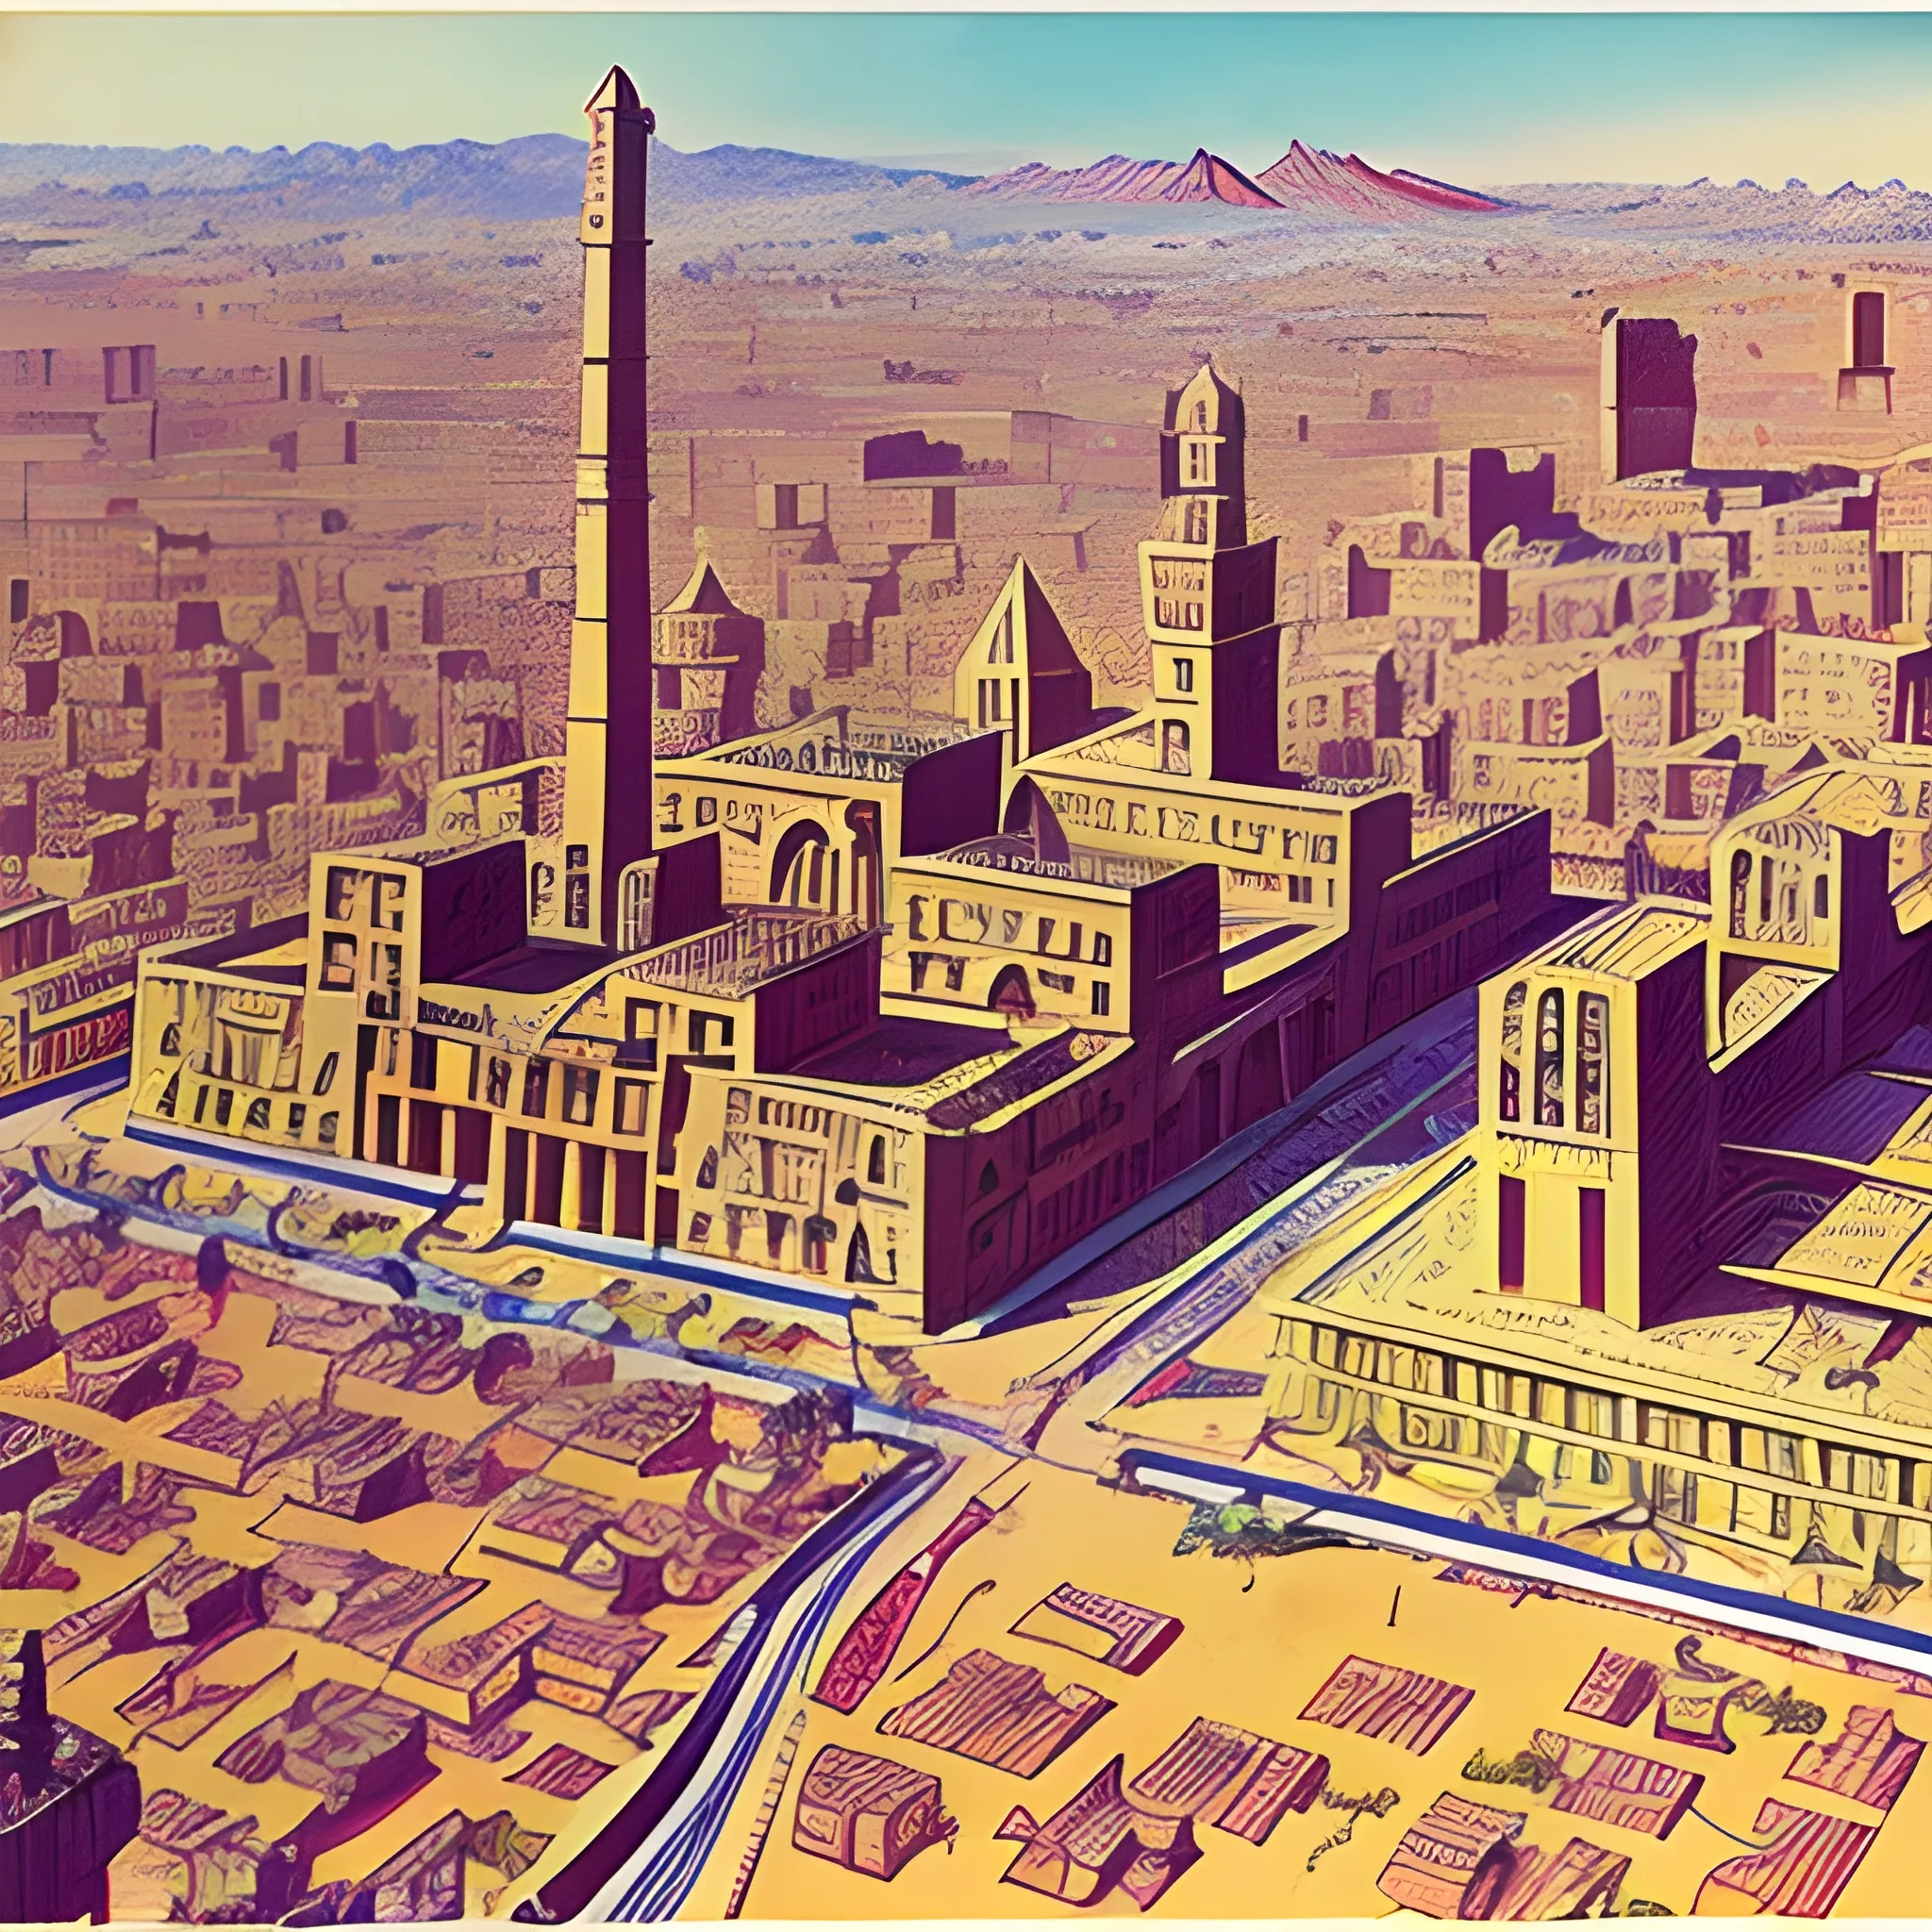 1960's Cairo with greek and Egyptian architecture in aspects of the buildings, drawn in jean Giraud's art style, aerial view